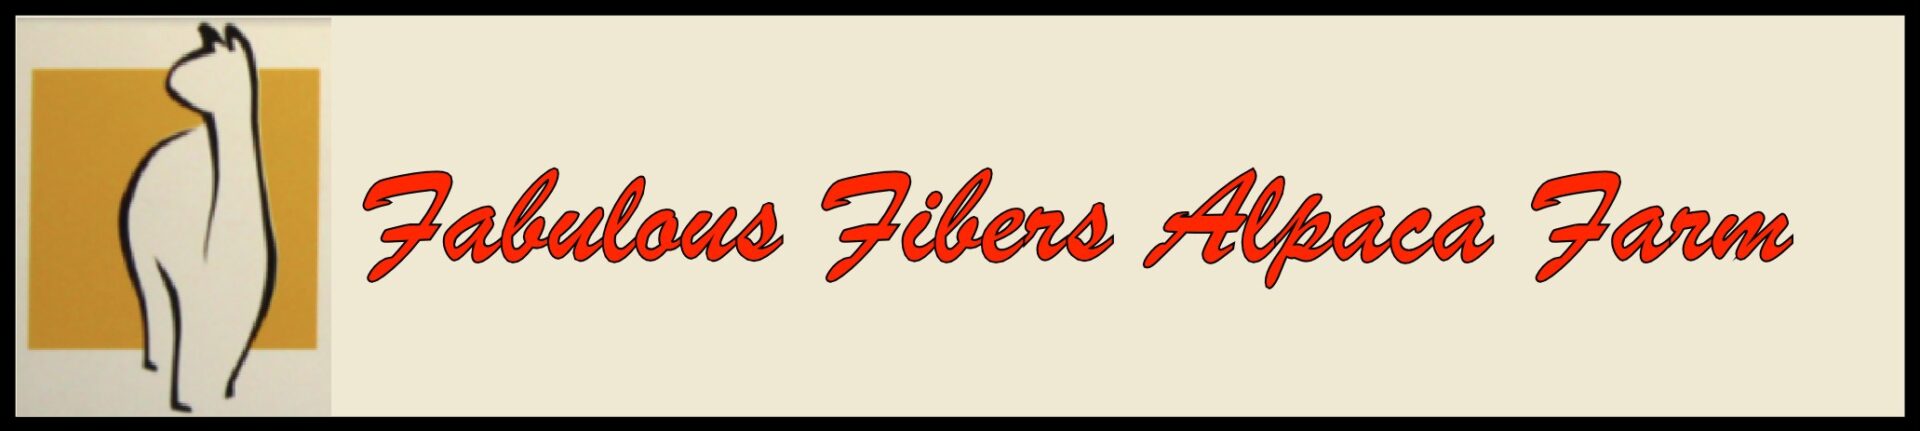 A red and white banner with the words " des fibers " written in it.